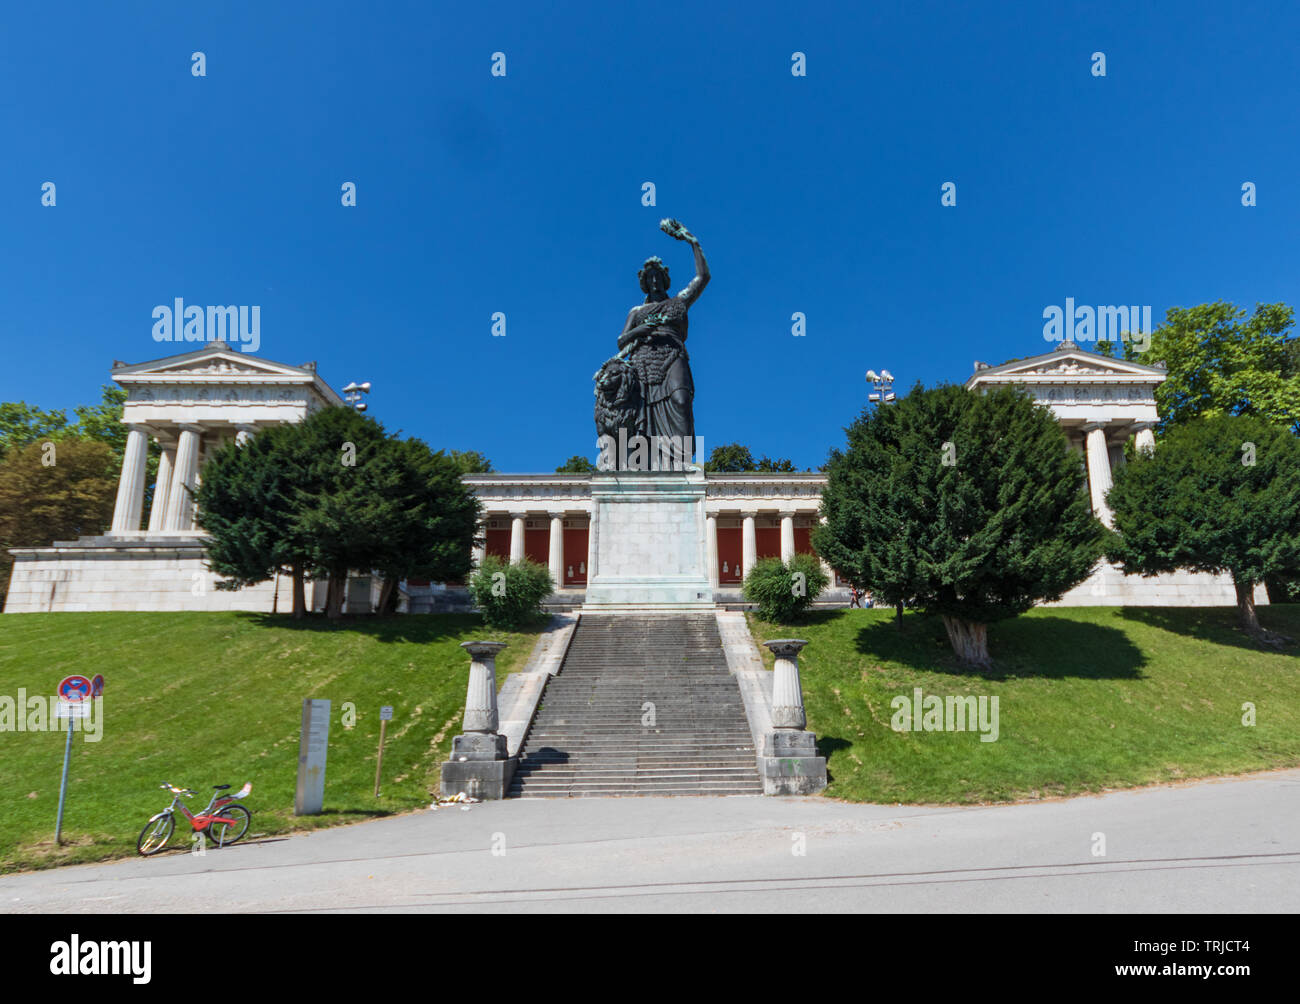 Munich, Germany - with its busts of important people from Bavaria history, the Ruhmeshalle is one of the main historycal buildings of Munich Stock Photo